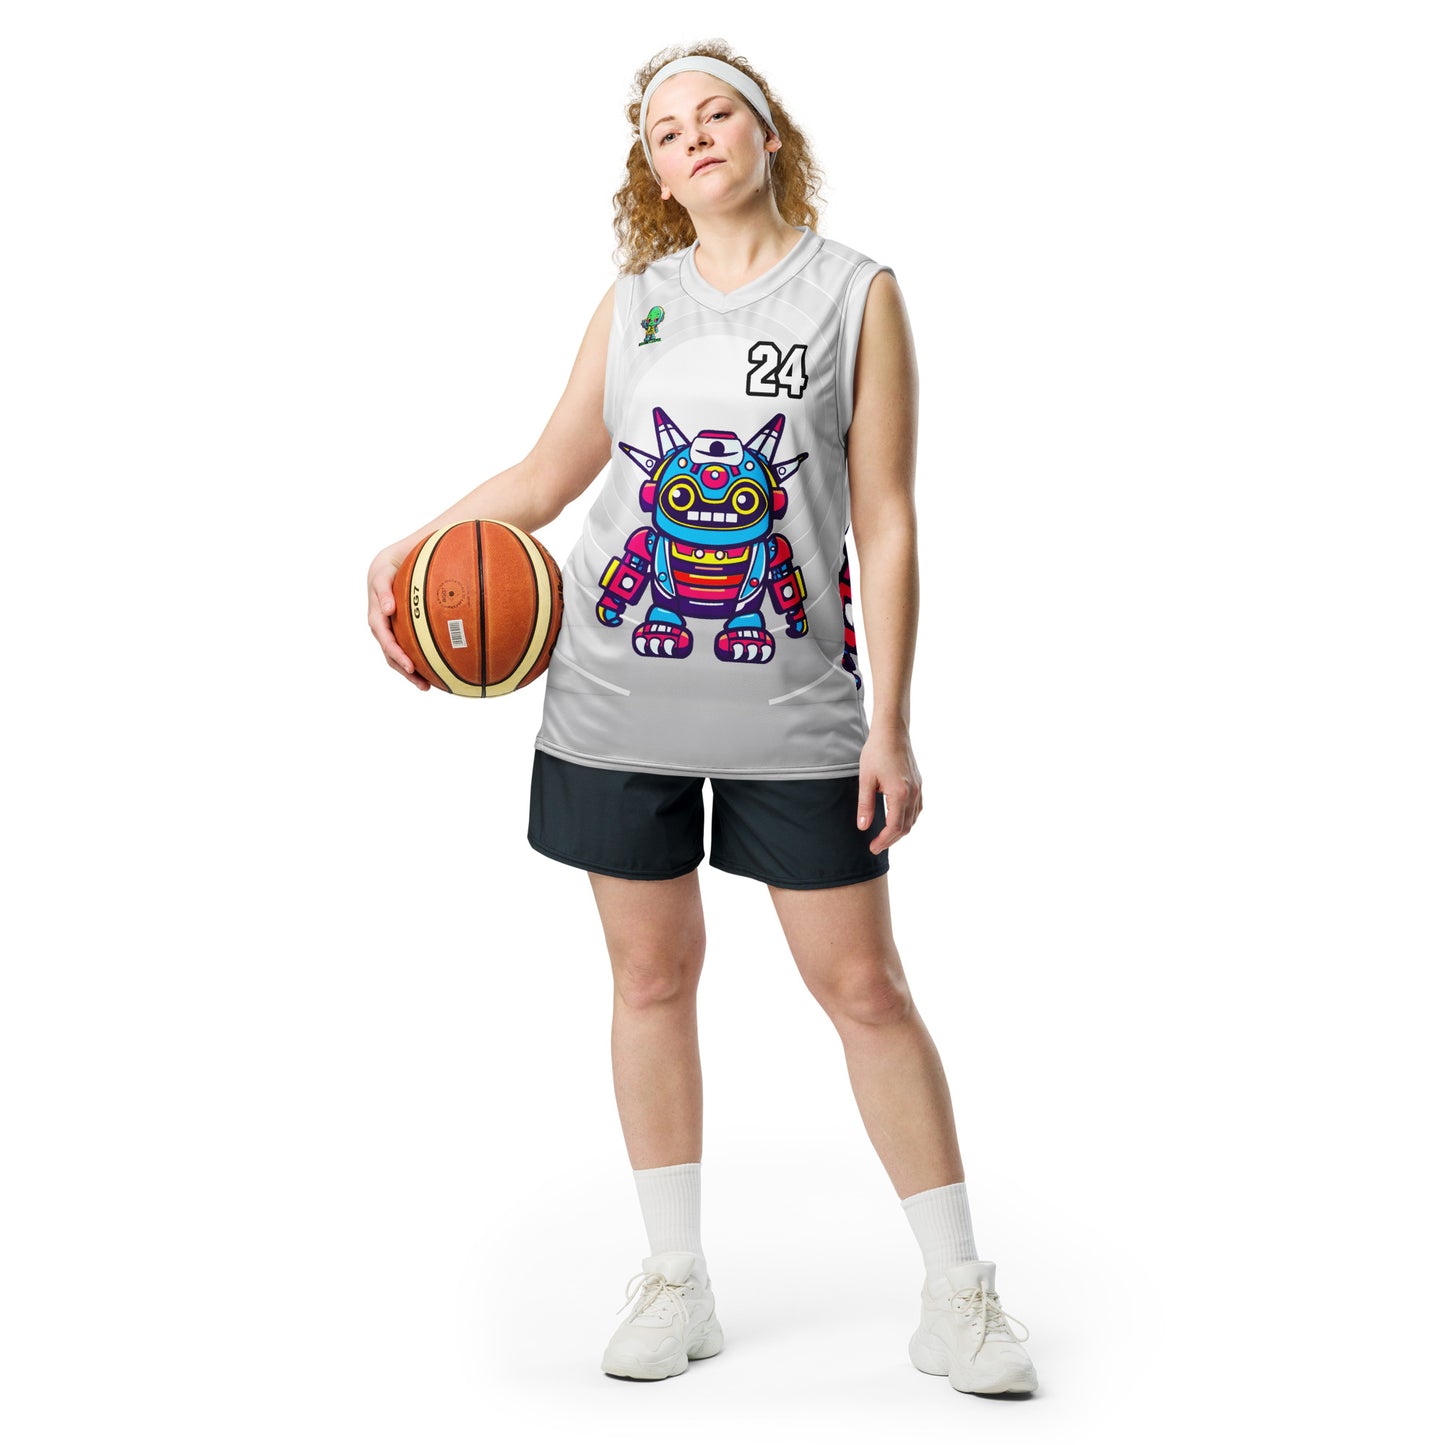 Techno Guardian - Recycled unisex basketball jersey - Ivory Vortex Colorway